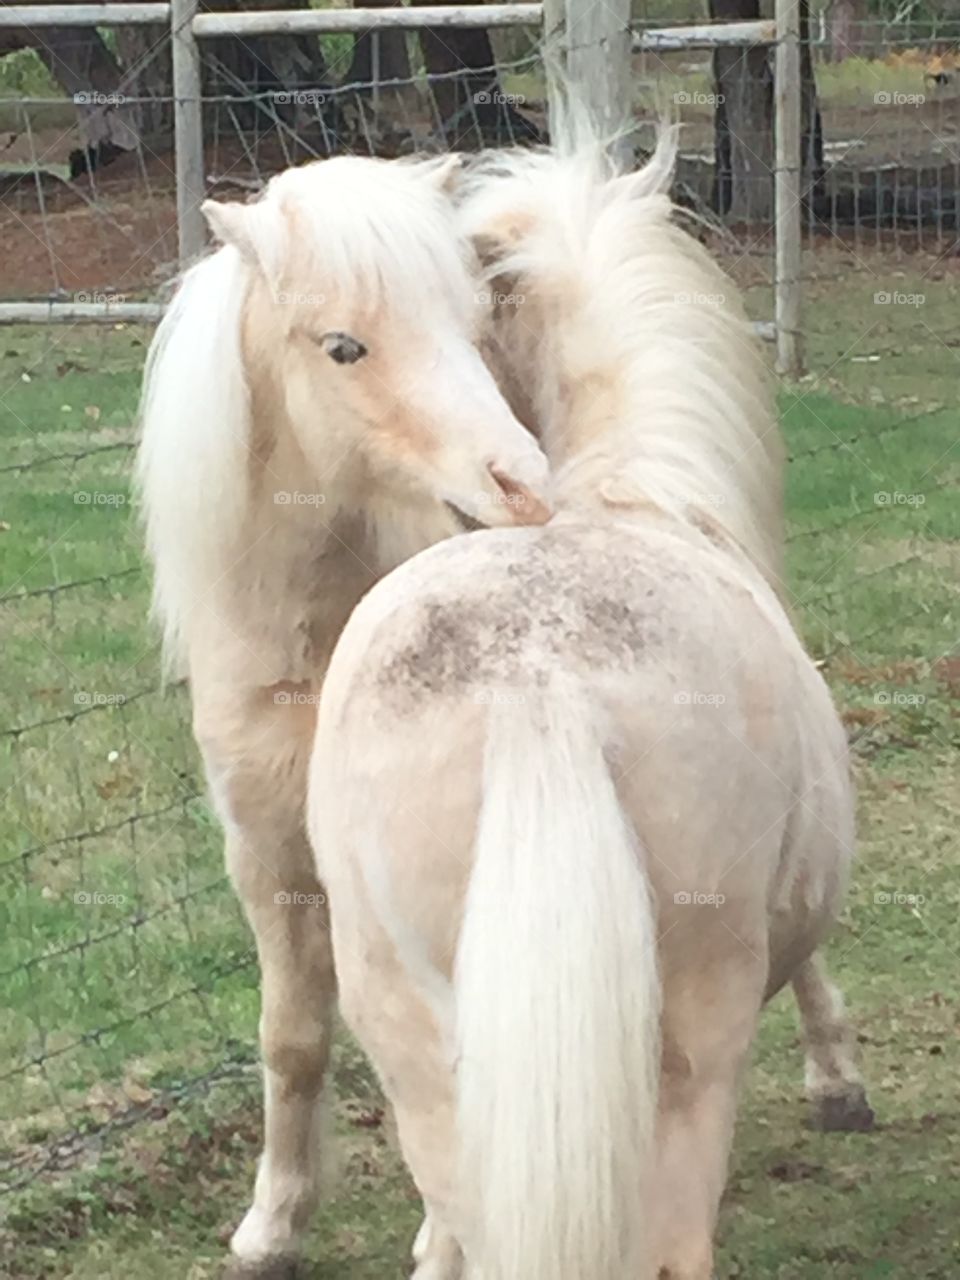 Two white ponies nuzzling each others necks.